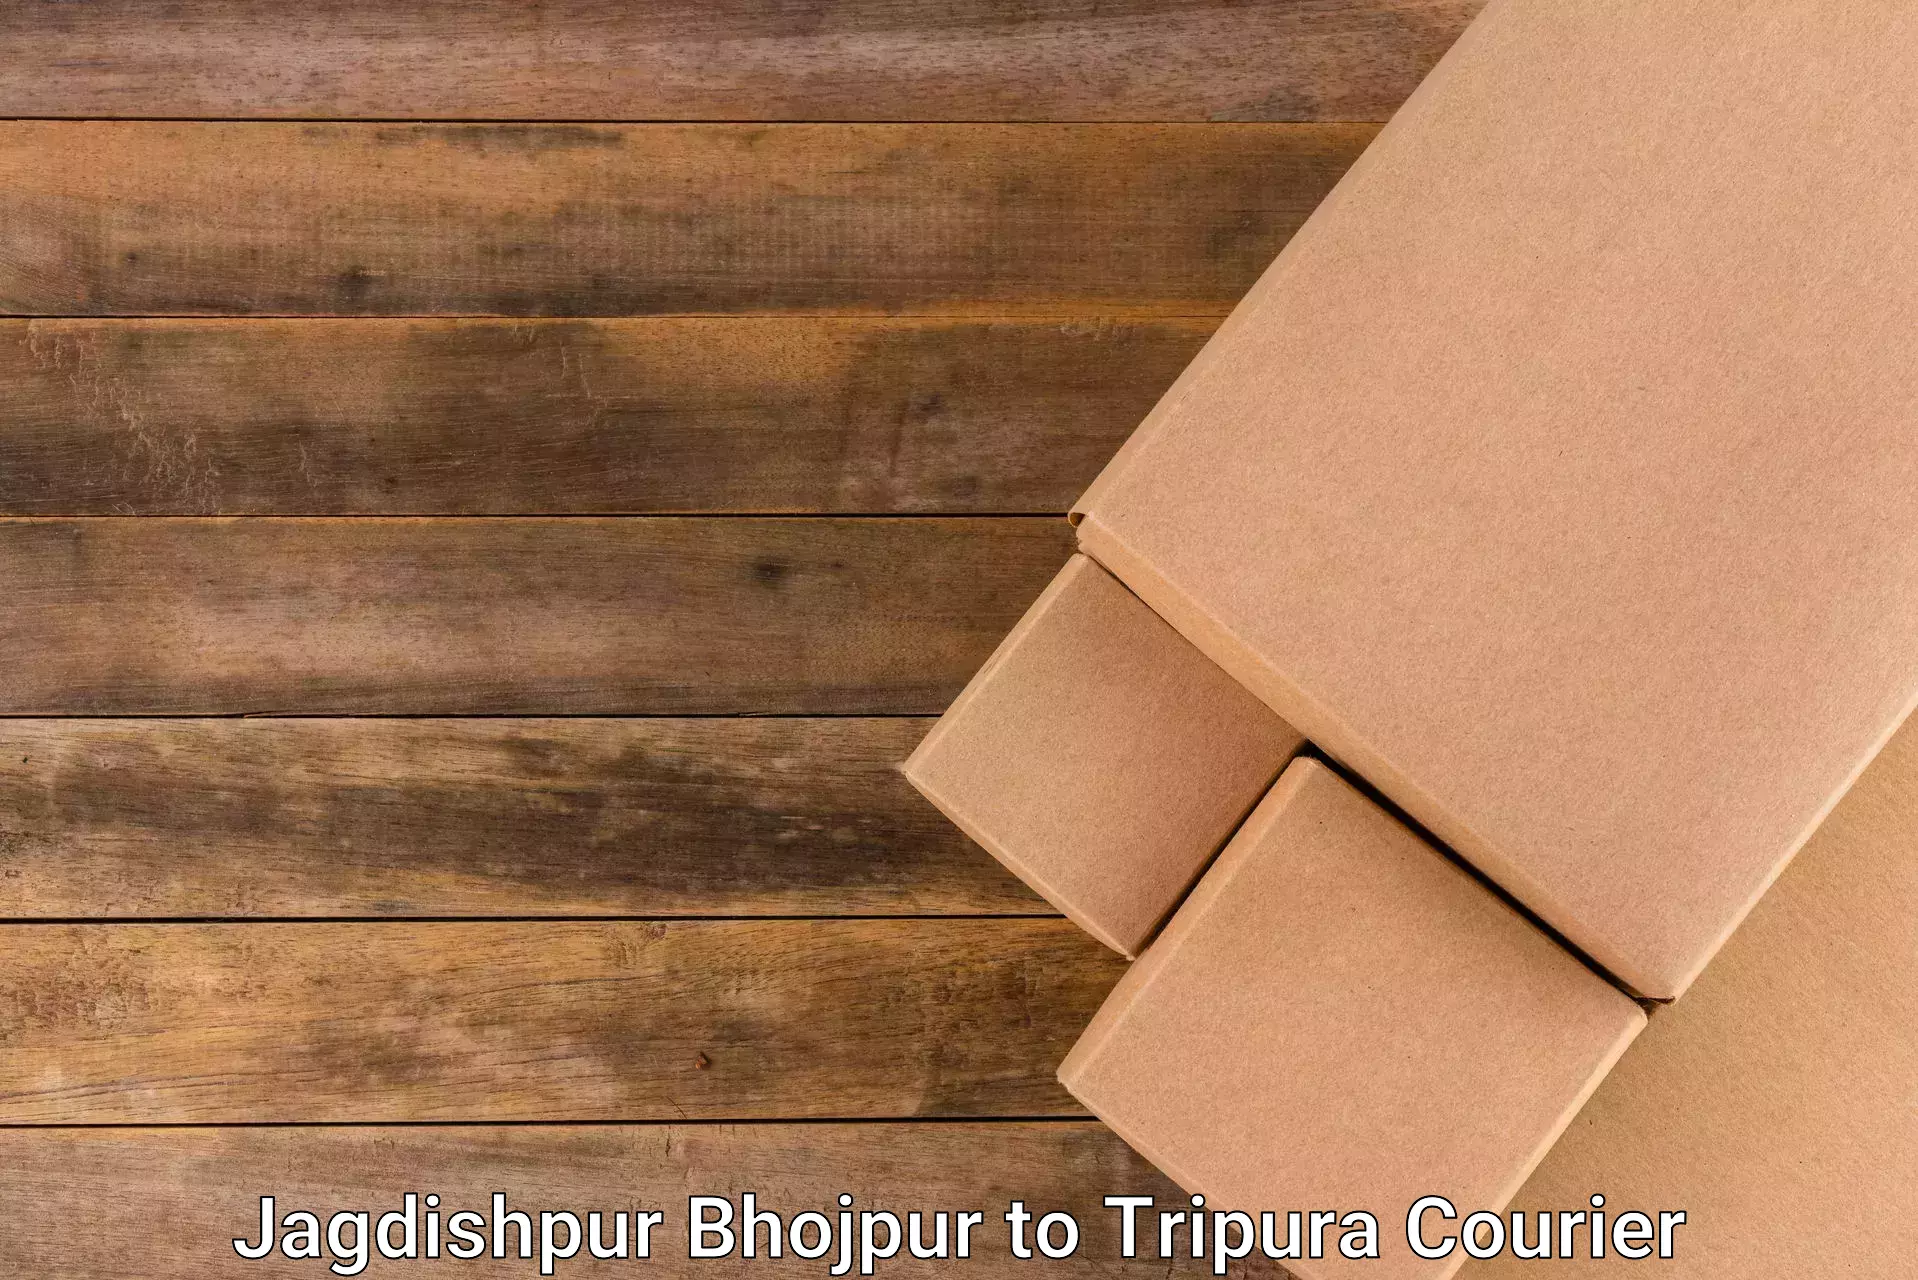 User-friendly delivery service Jagdishpur Bhojpur to South Tripura